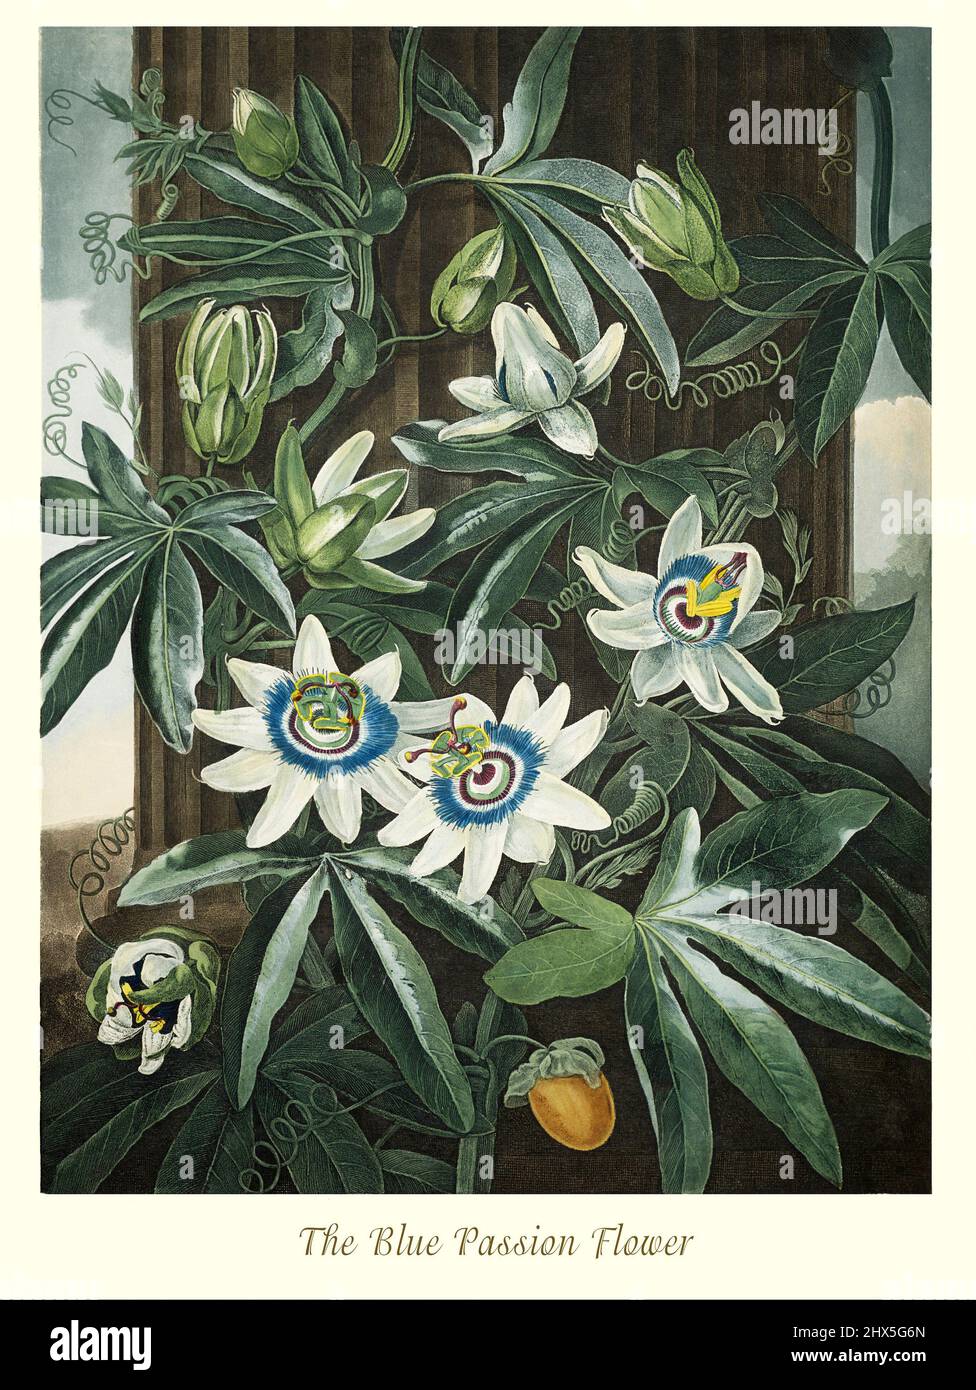 An early 19th century illustration of the Blue Passion Flower in the Genus Passiflora and Family Passifloraceae, a genus of about 550 species of flowering plants, mostly tendril-bearing vines, with some being shrubs or trees. They can be woody or herbaceous. Passion flowers produce regular and usually showy flowers with a distinctive corona. The flower is pentamerous and ripens into an indehiscent fruit with numerous seeds. This artwork for Robert John Thornton's 'The Temple of Flora' in 1807, was printed, for the publisher, by T. Bensley, London, England. Stock Photo